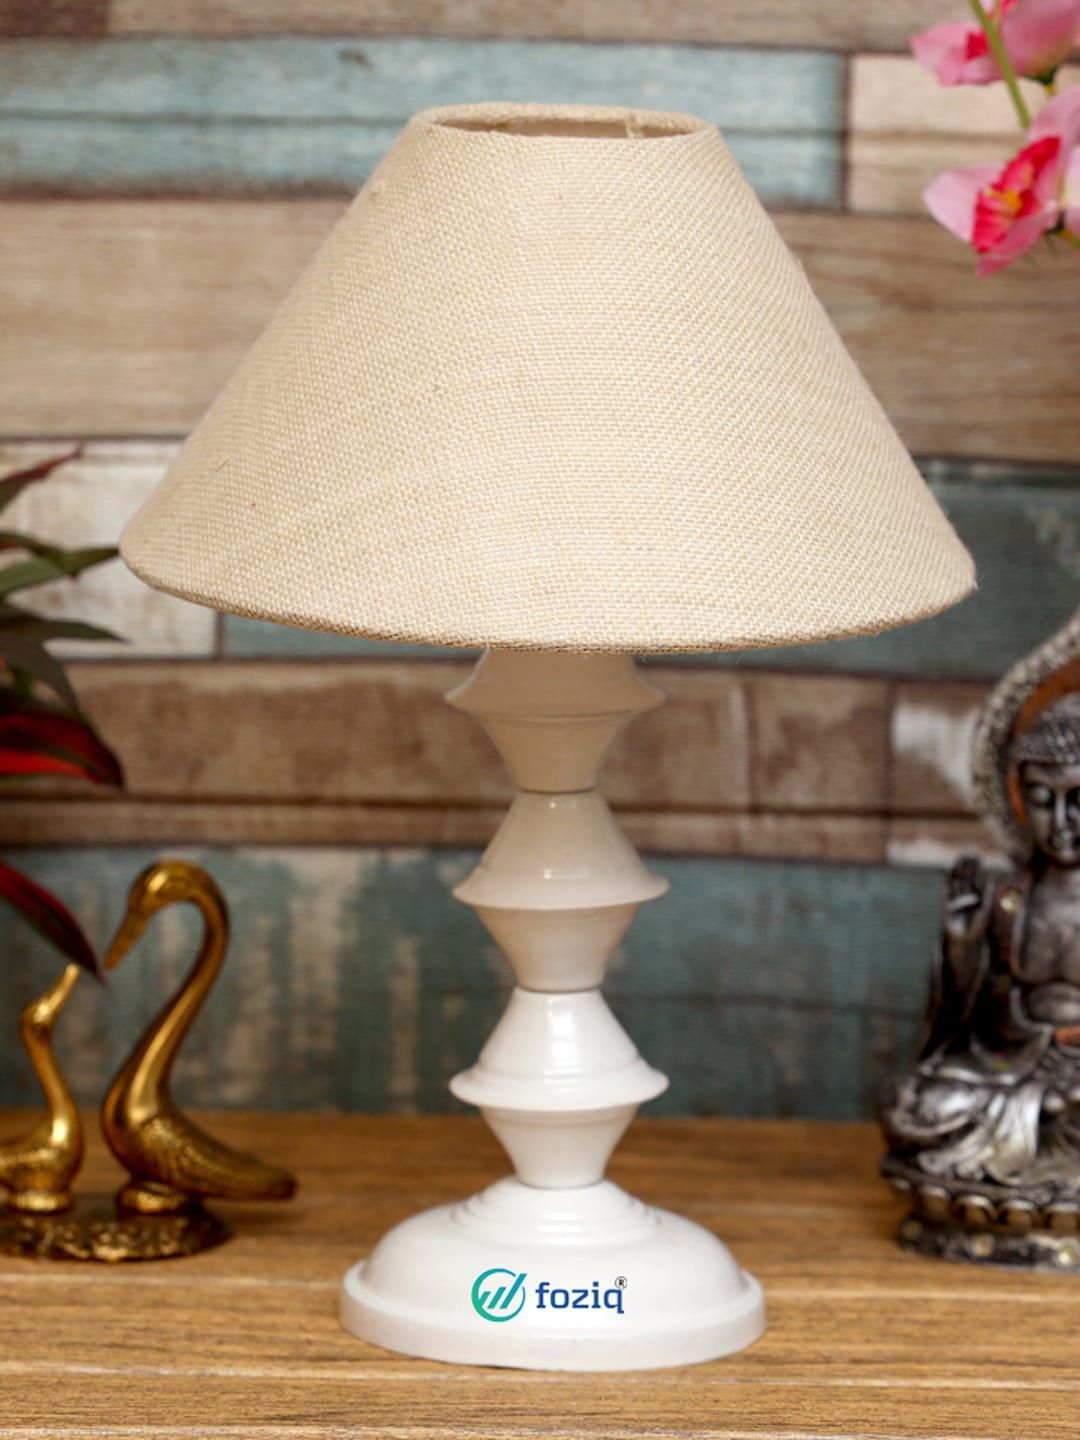 foziq White & Beige Solid Textured Bell Shaped Table Lamp Price in India